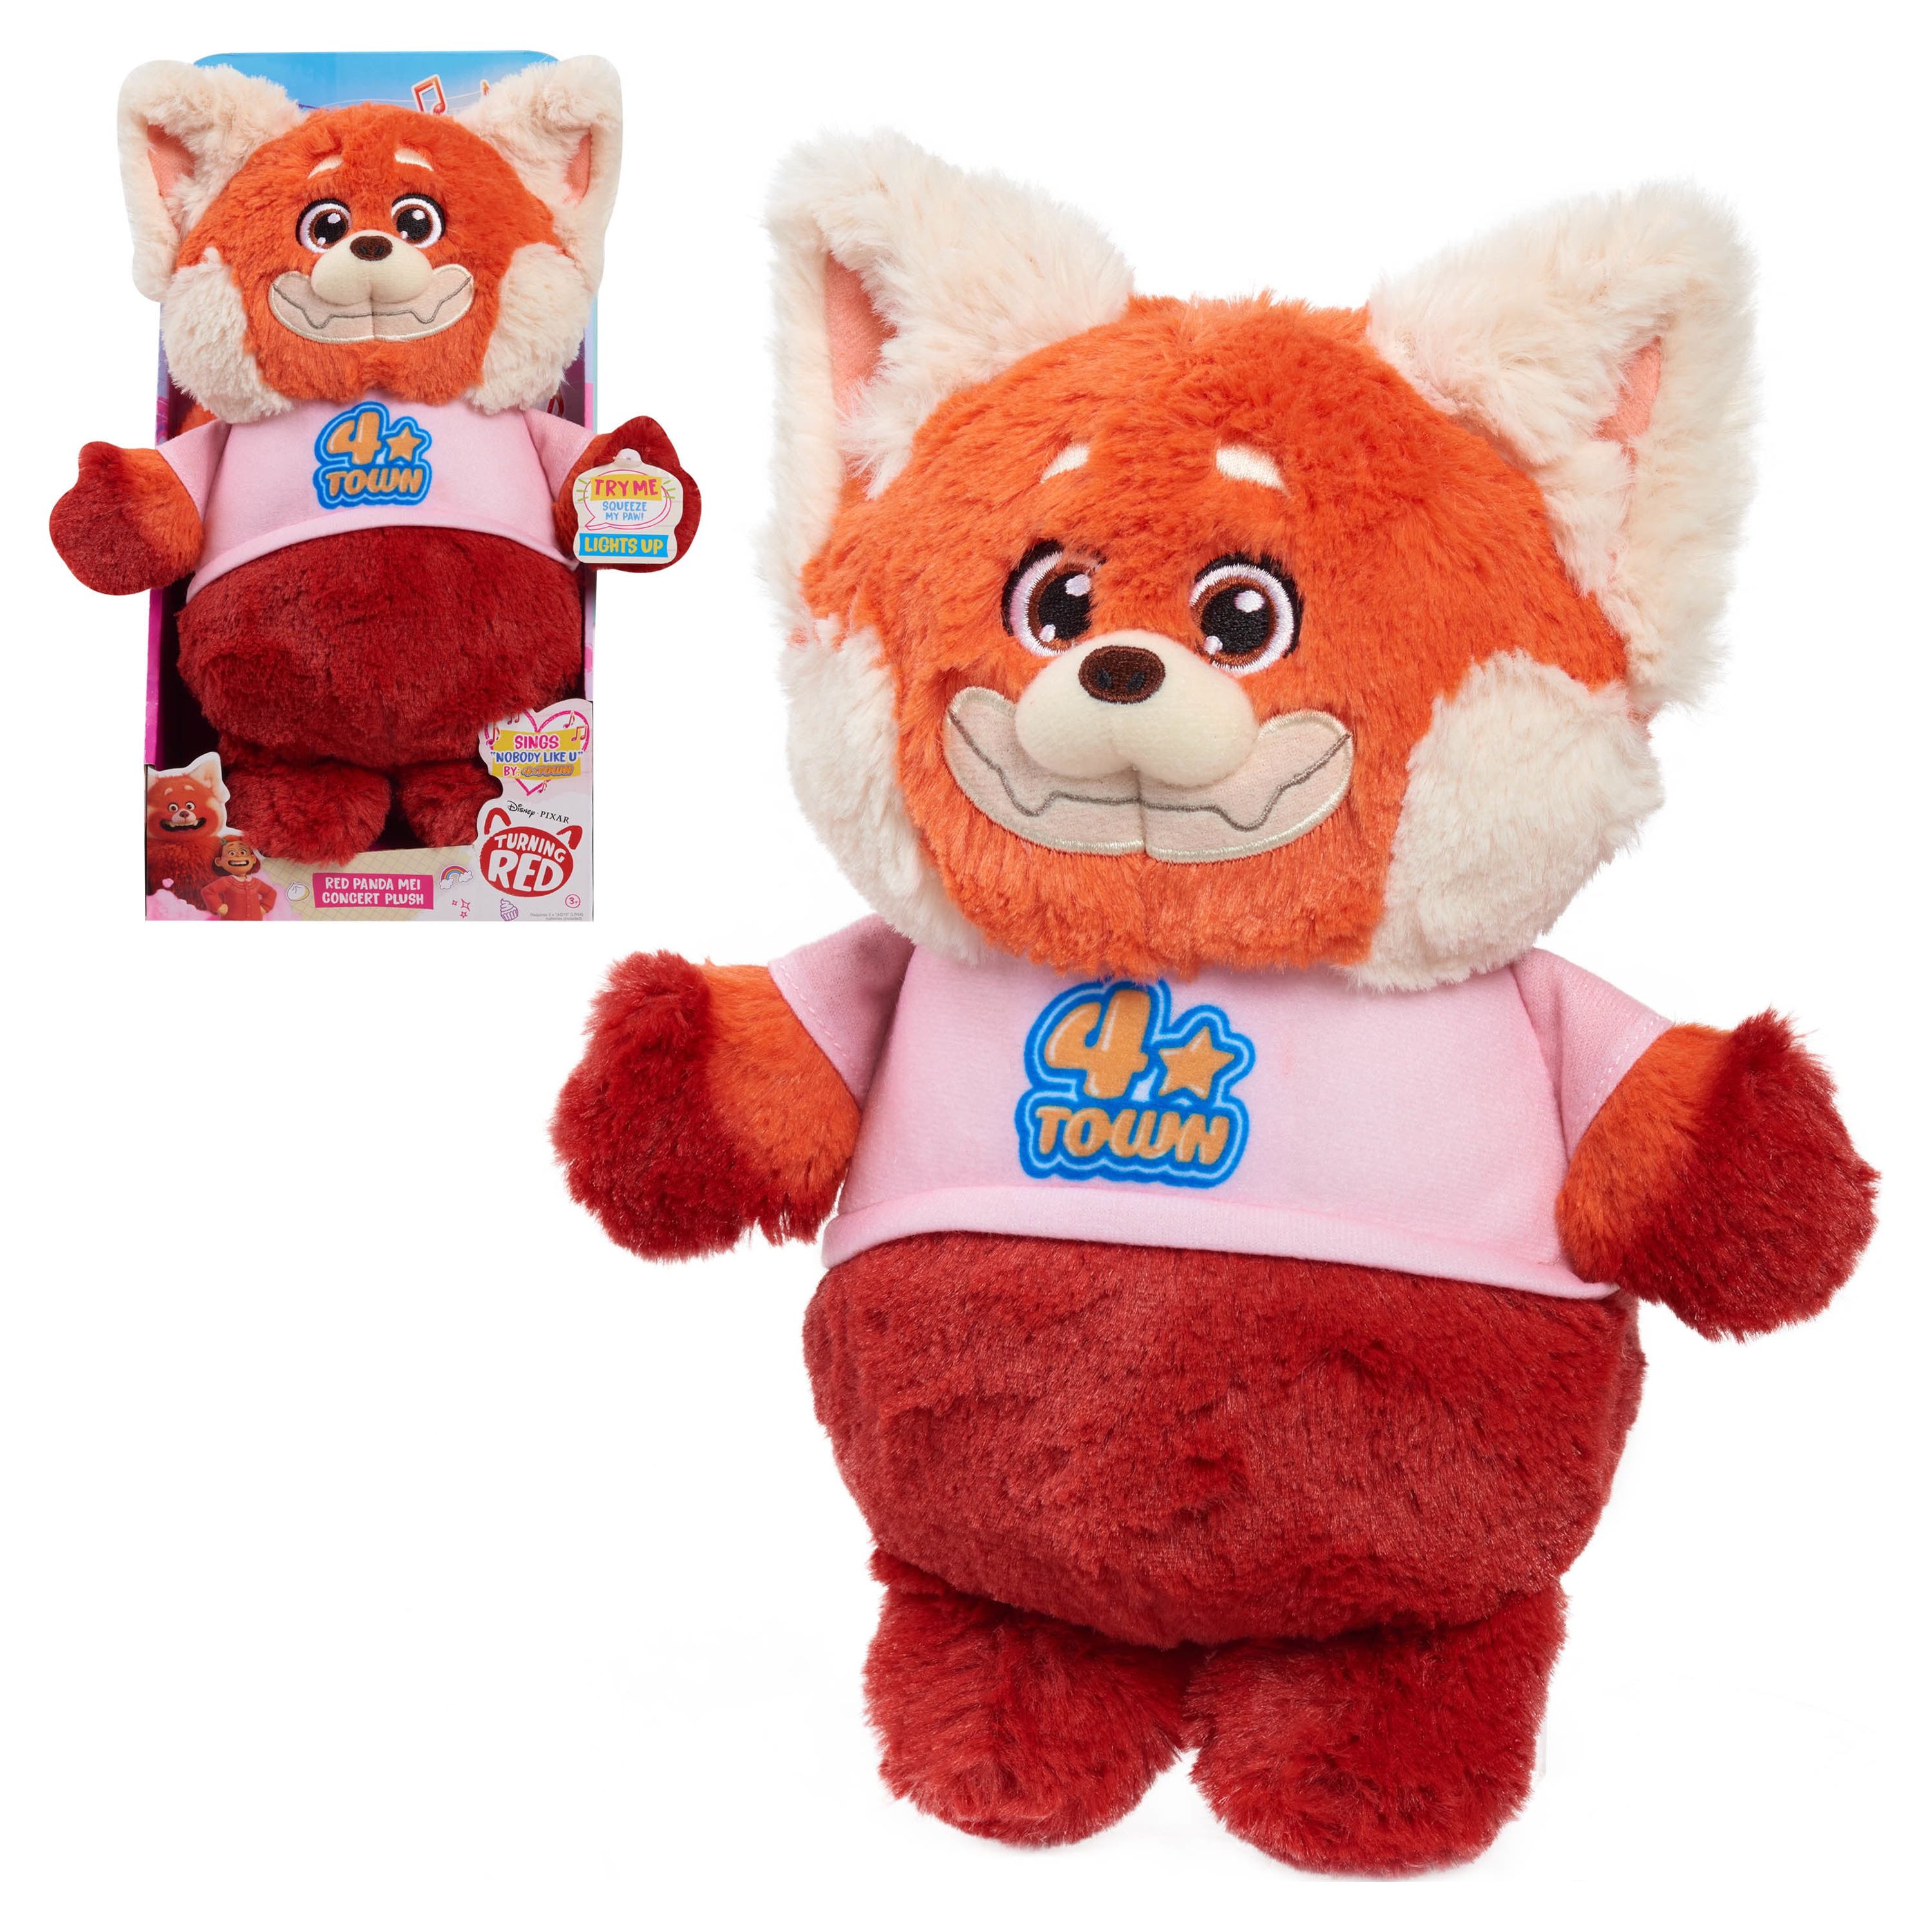 Disney and Pixar Turning Red – Red Panda Mei 11-inch Concert Plush with Lights and Sounds, Officially Licensed Kids Toys for Ages 3 Up, Gifts and Presents - image 1 of 8